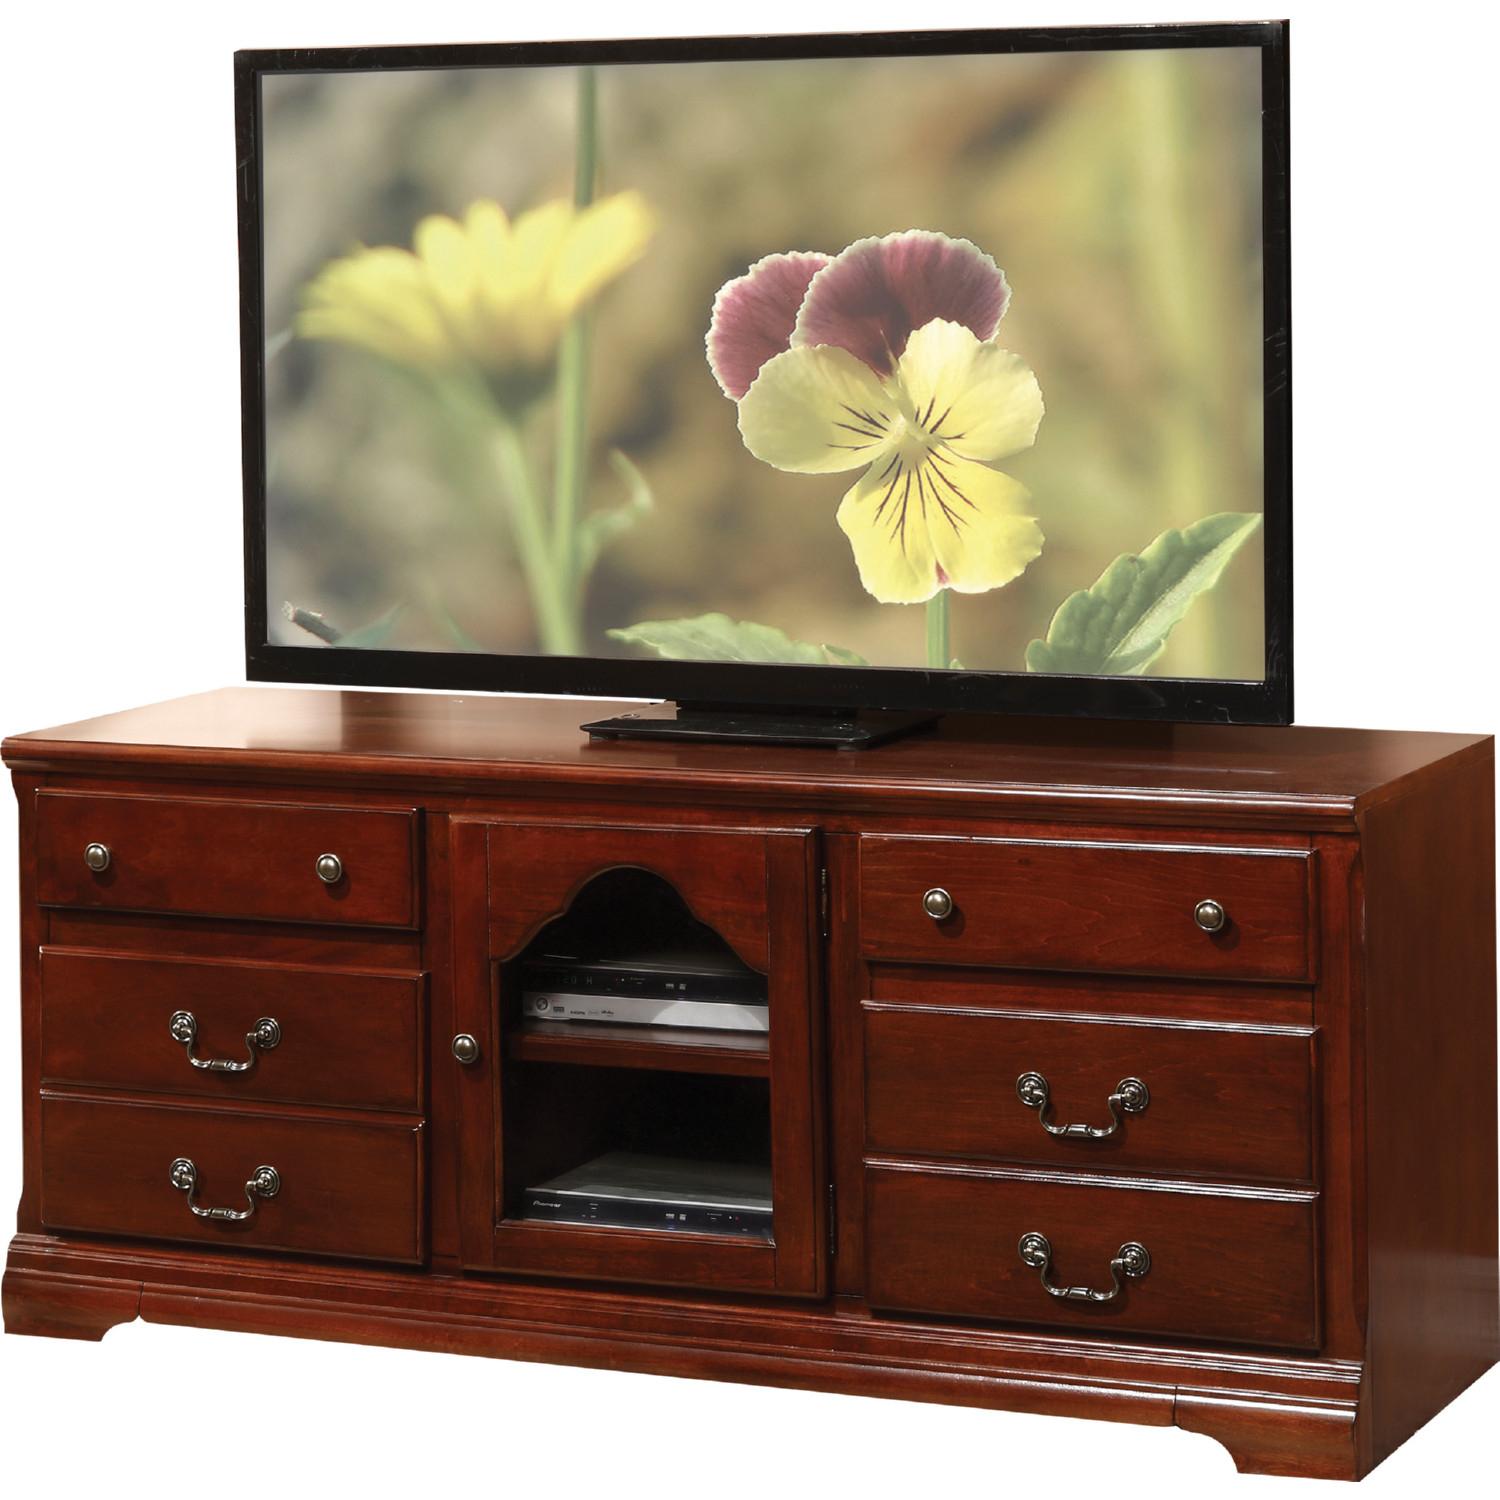 

    
Transitional Cherry TV Stand by Acme Hercules 91113
